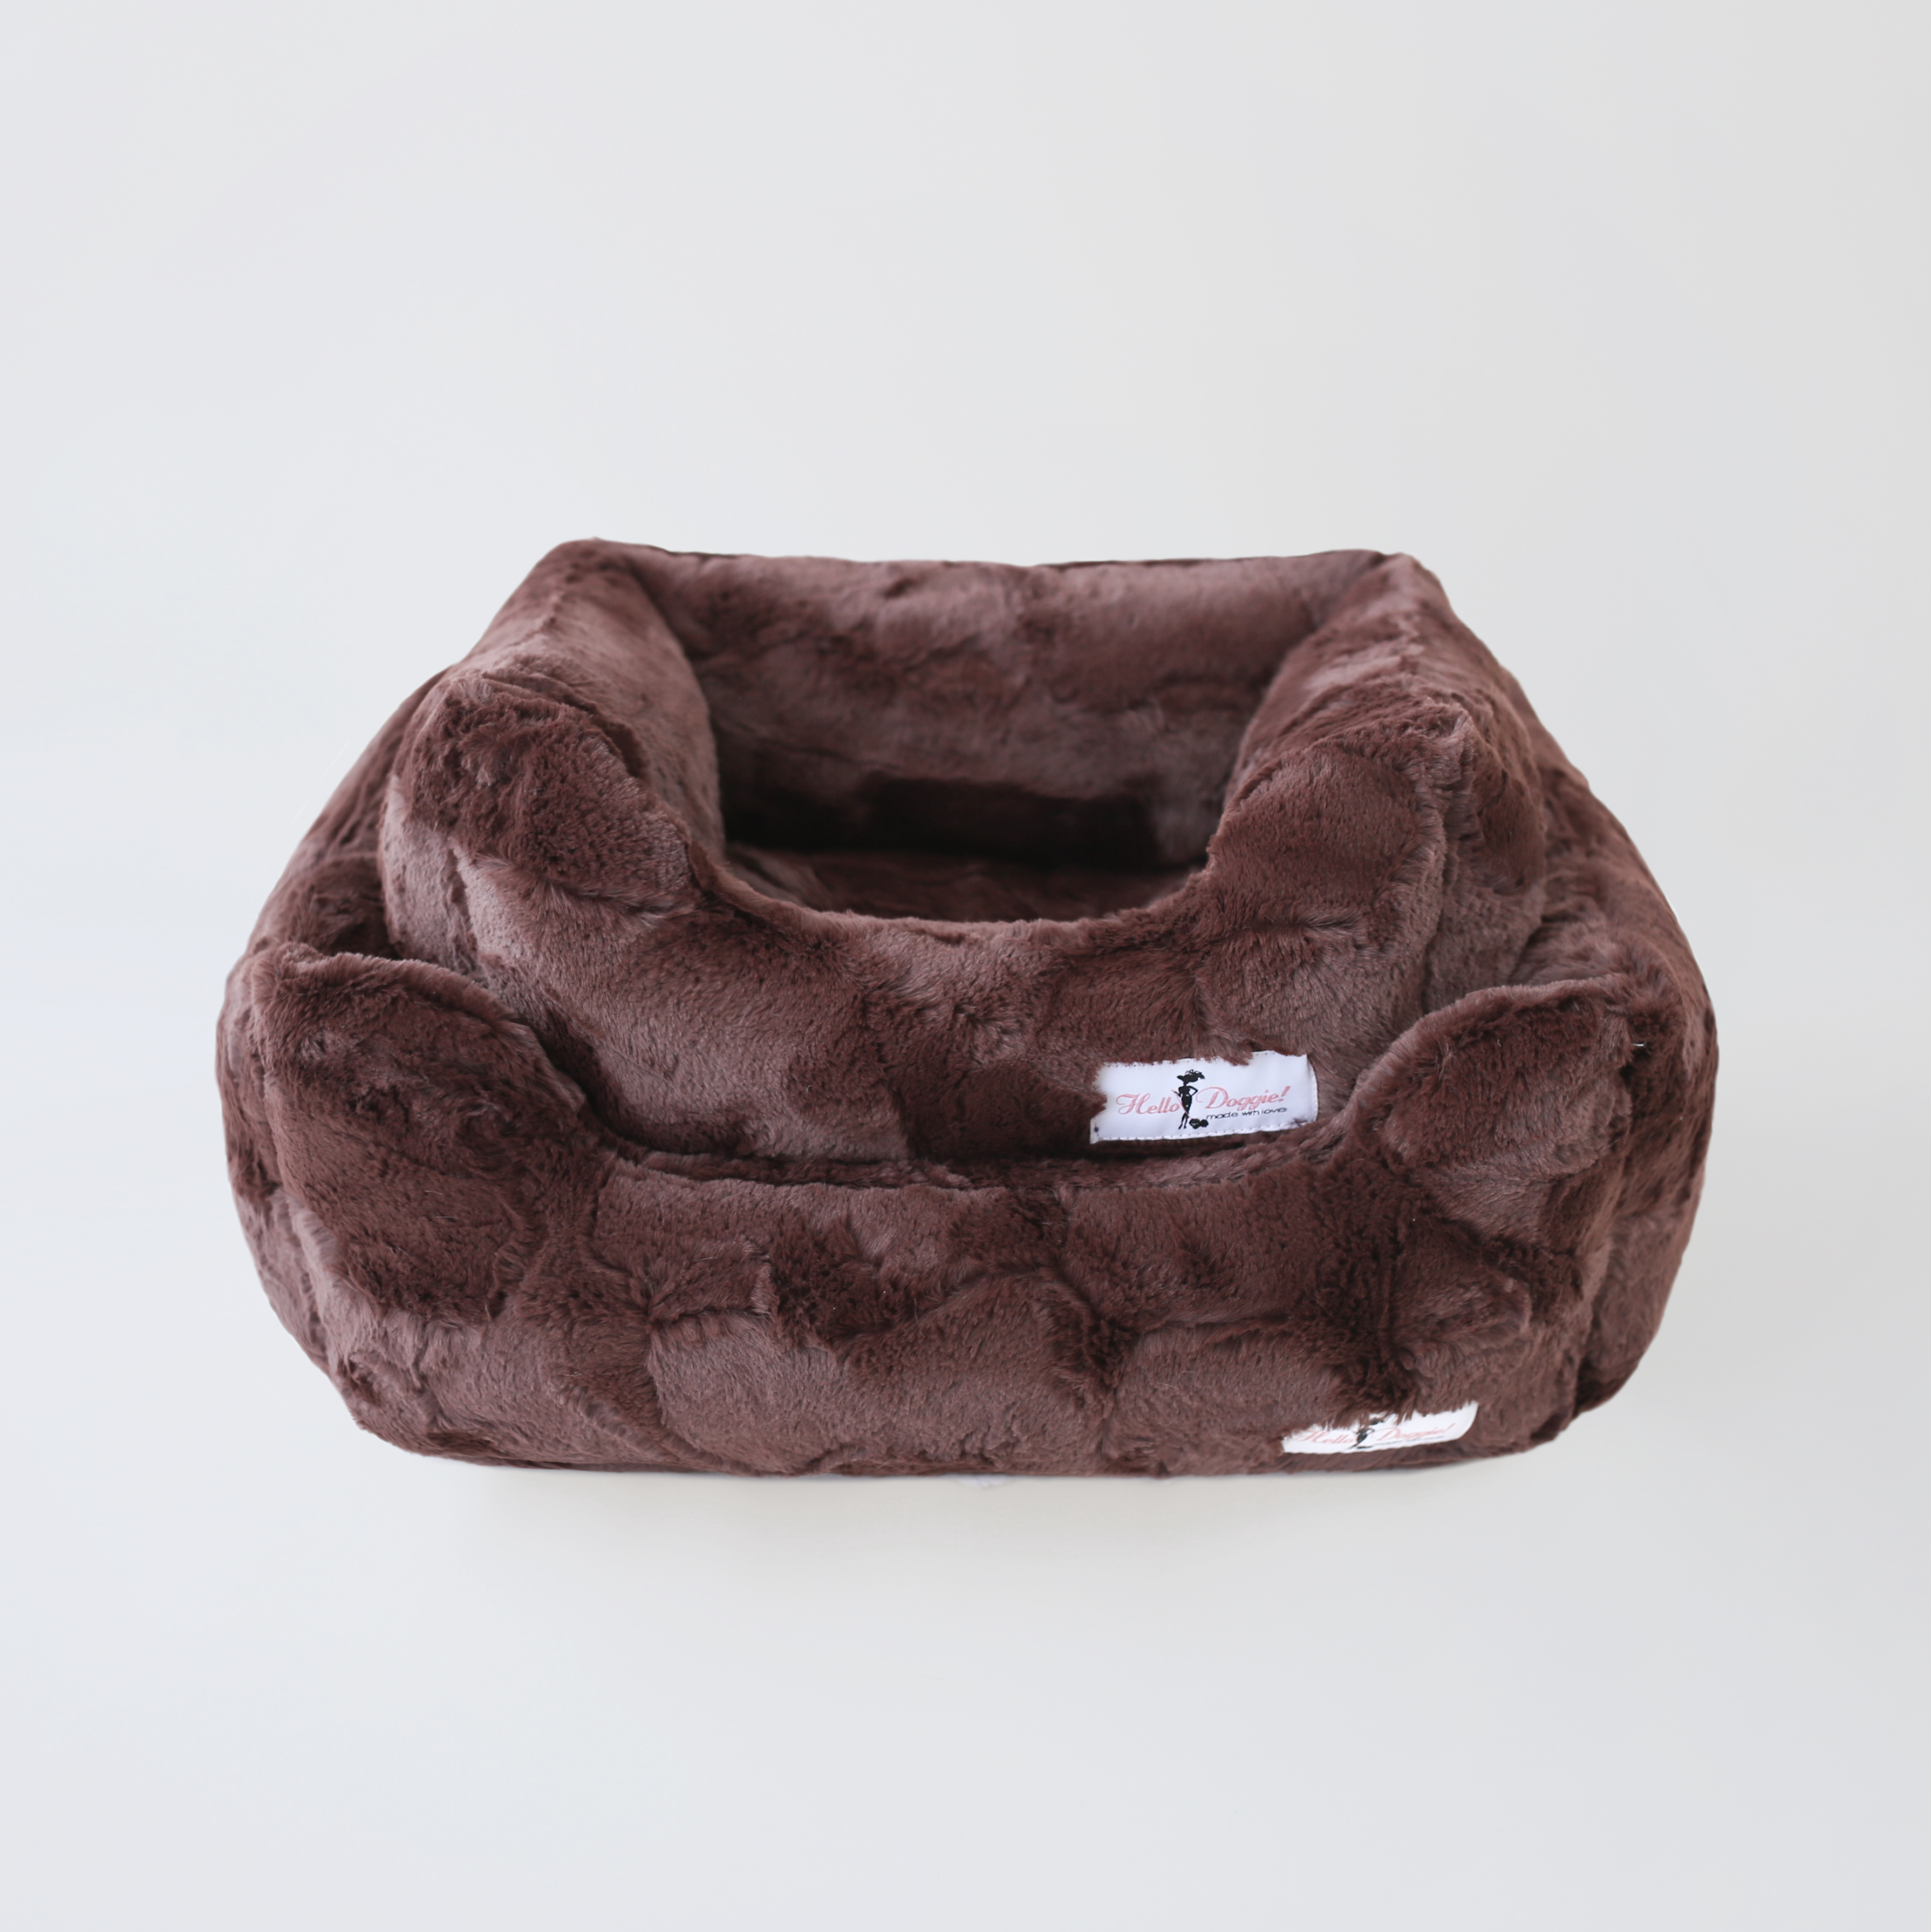 Pet Boutique - Designer Dog Beds - Chocolate Luxe Luxury Dog Bed by Hello Doggie 